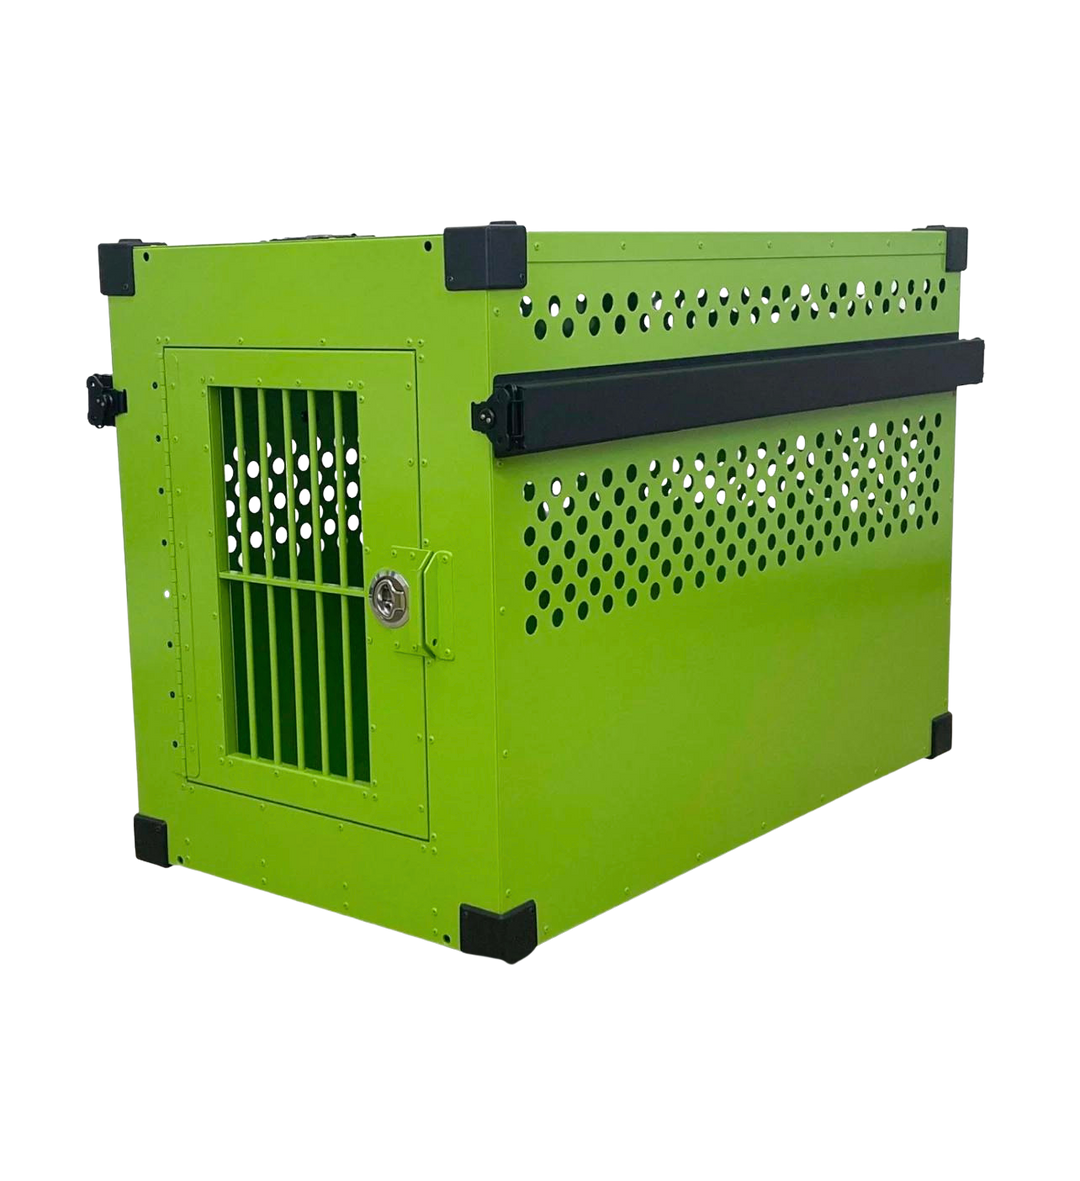 Stationary Metal Crate